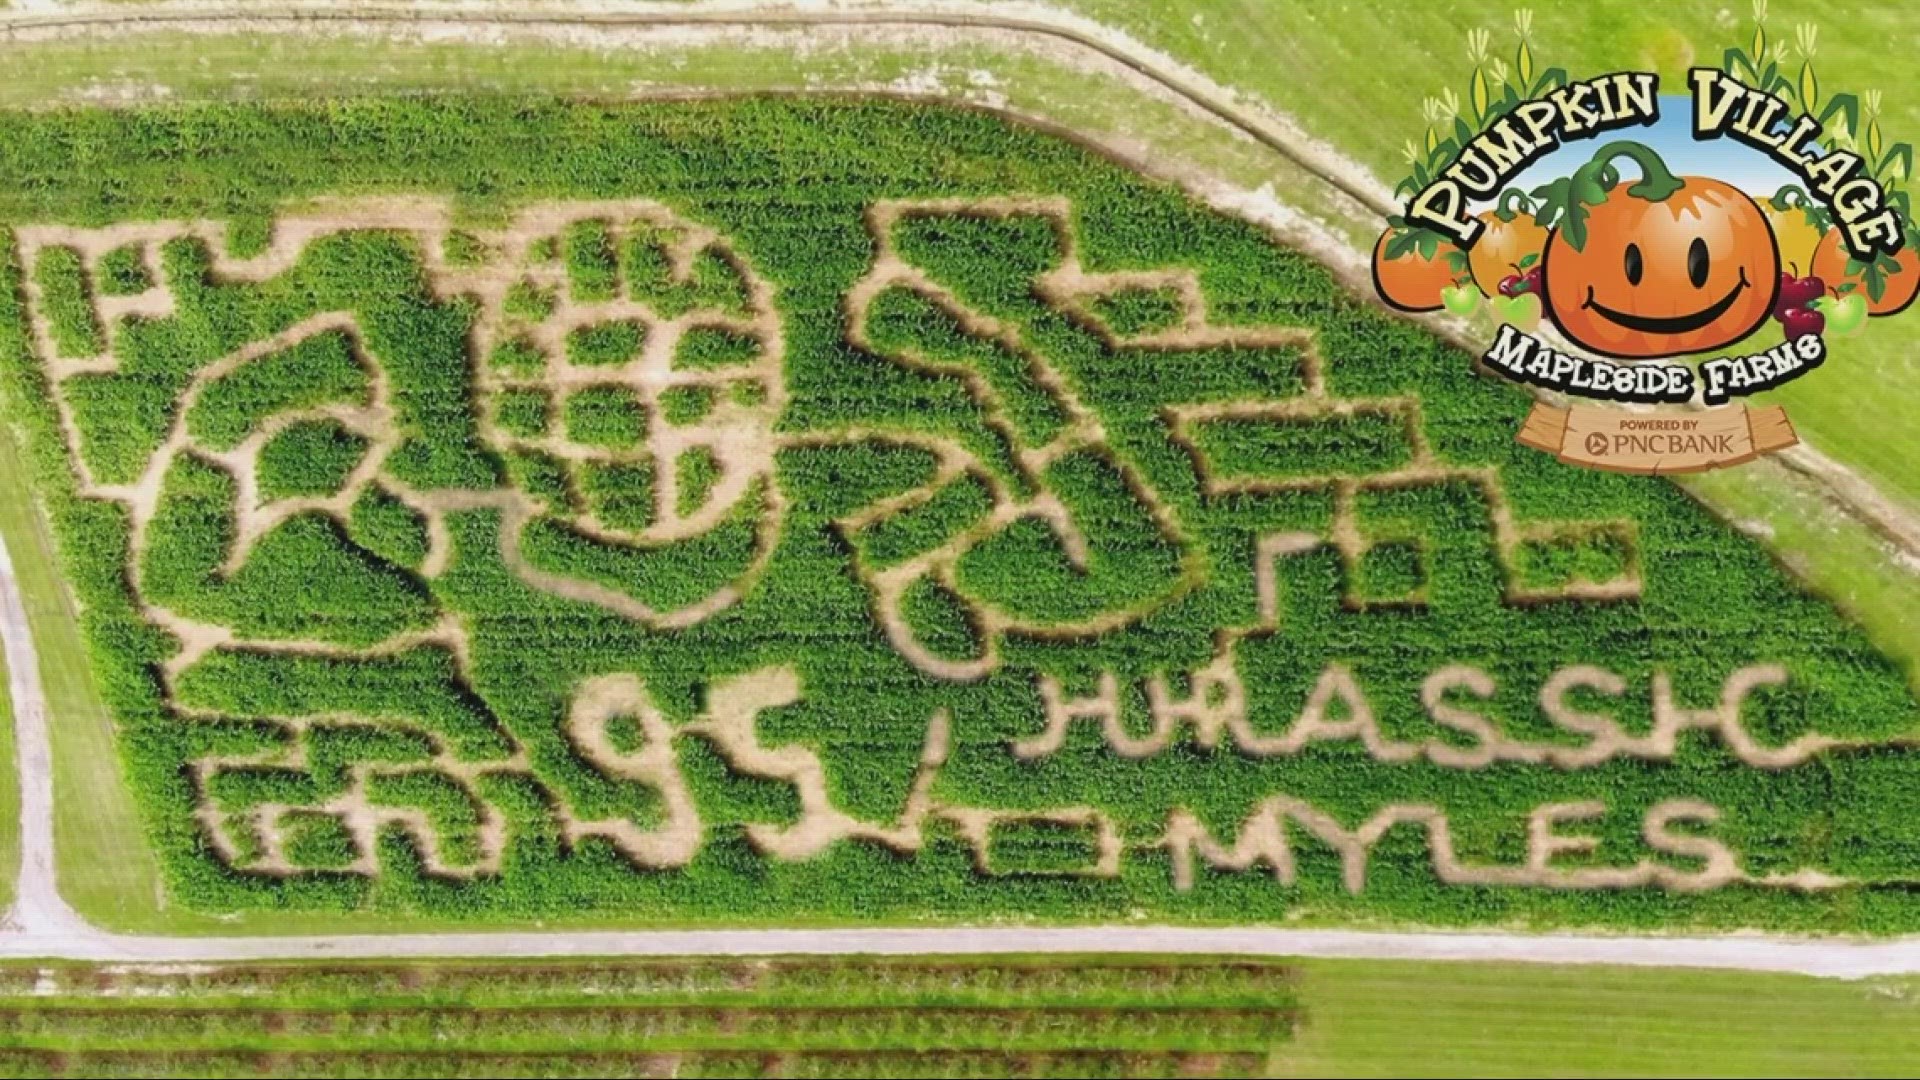 The 'Jurassic Myles' corn maze can now be experienced on the grounds of Mapleside Farms in Brunswick.